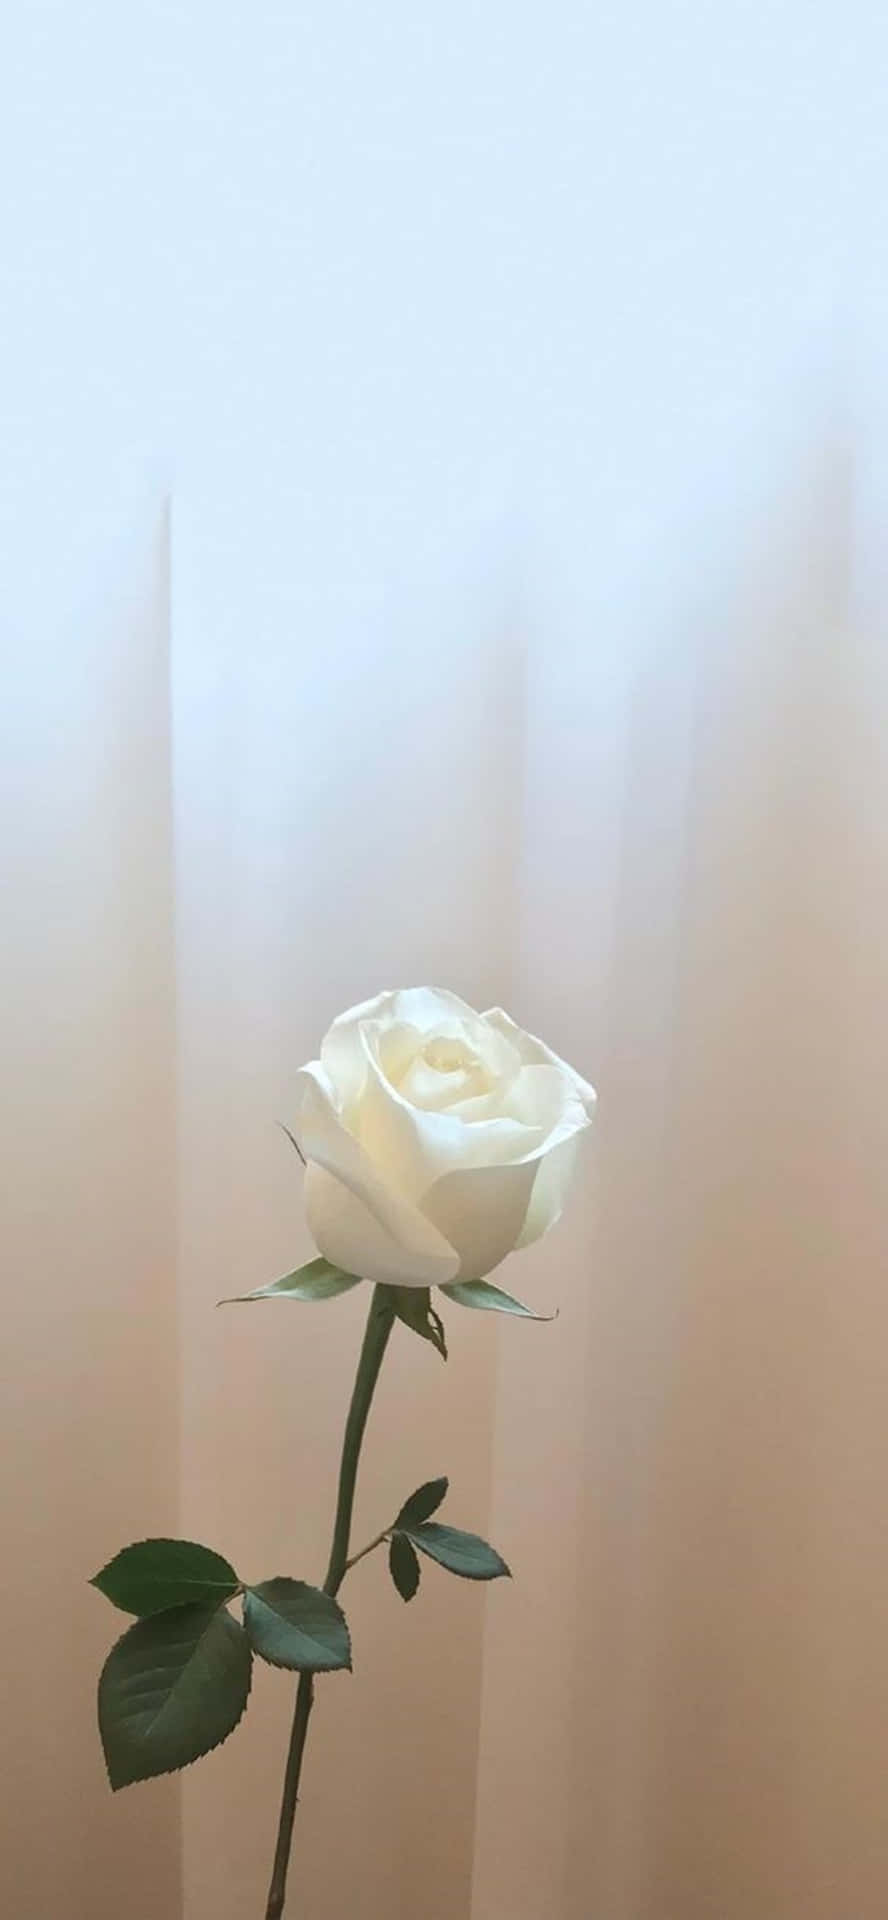 A velvety white rose beneath a bewitching night sky. Wallpaper